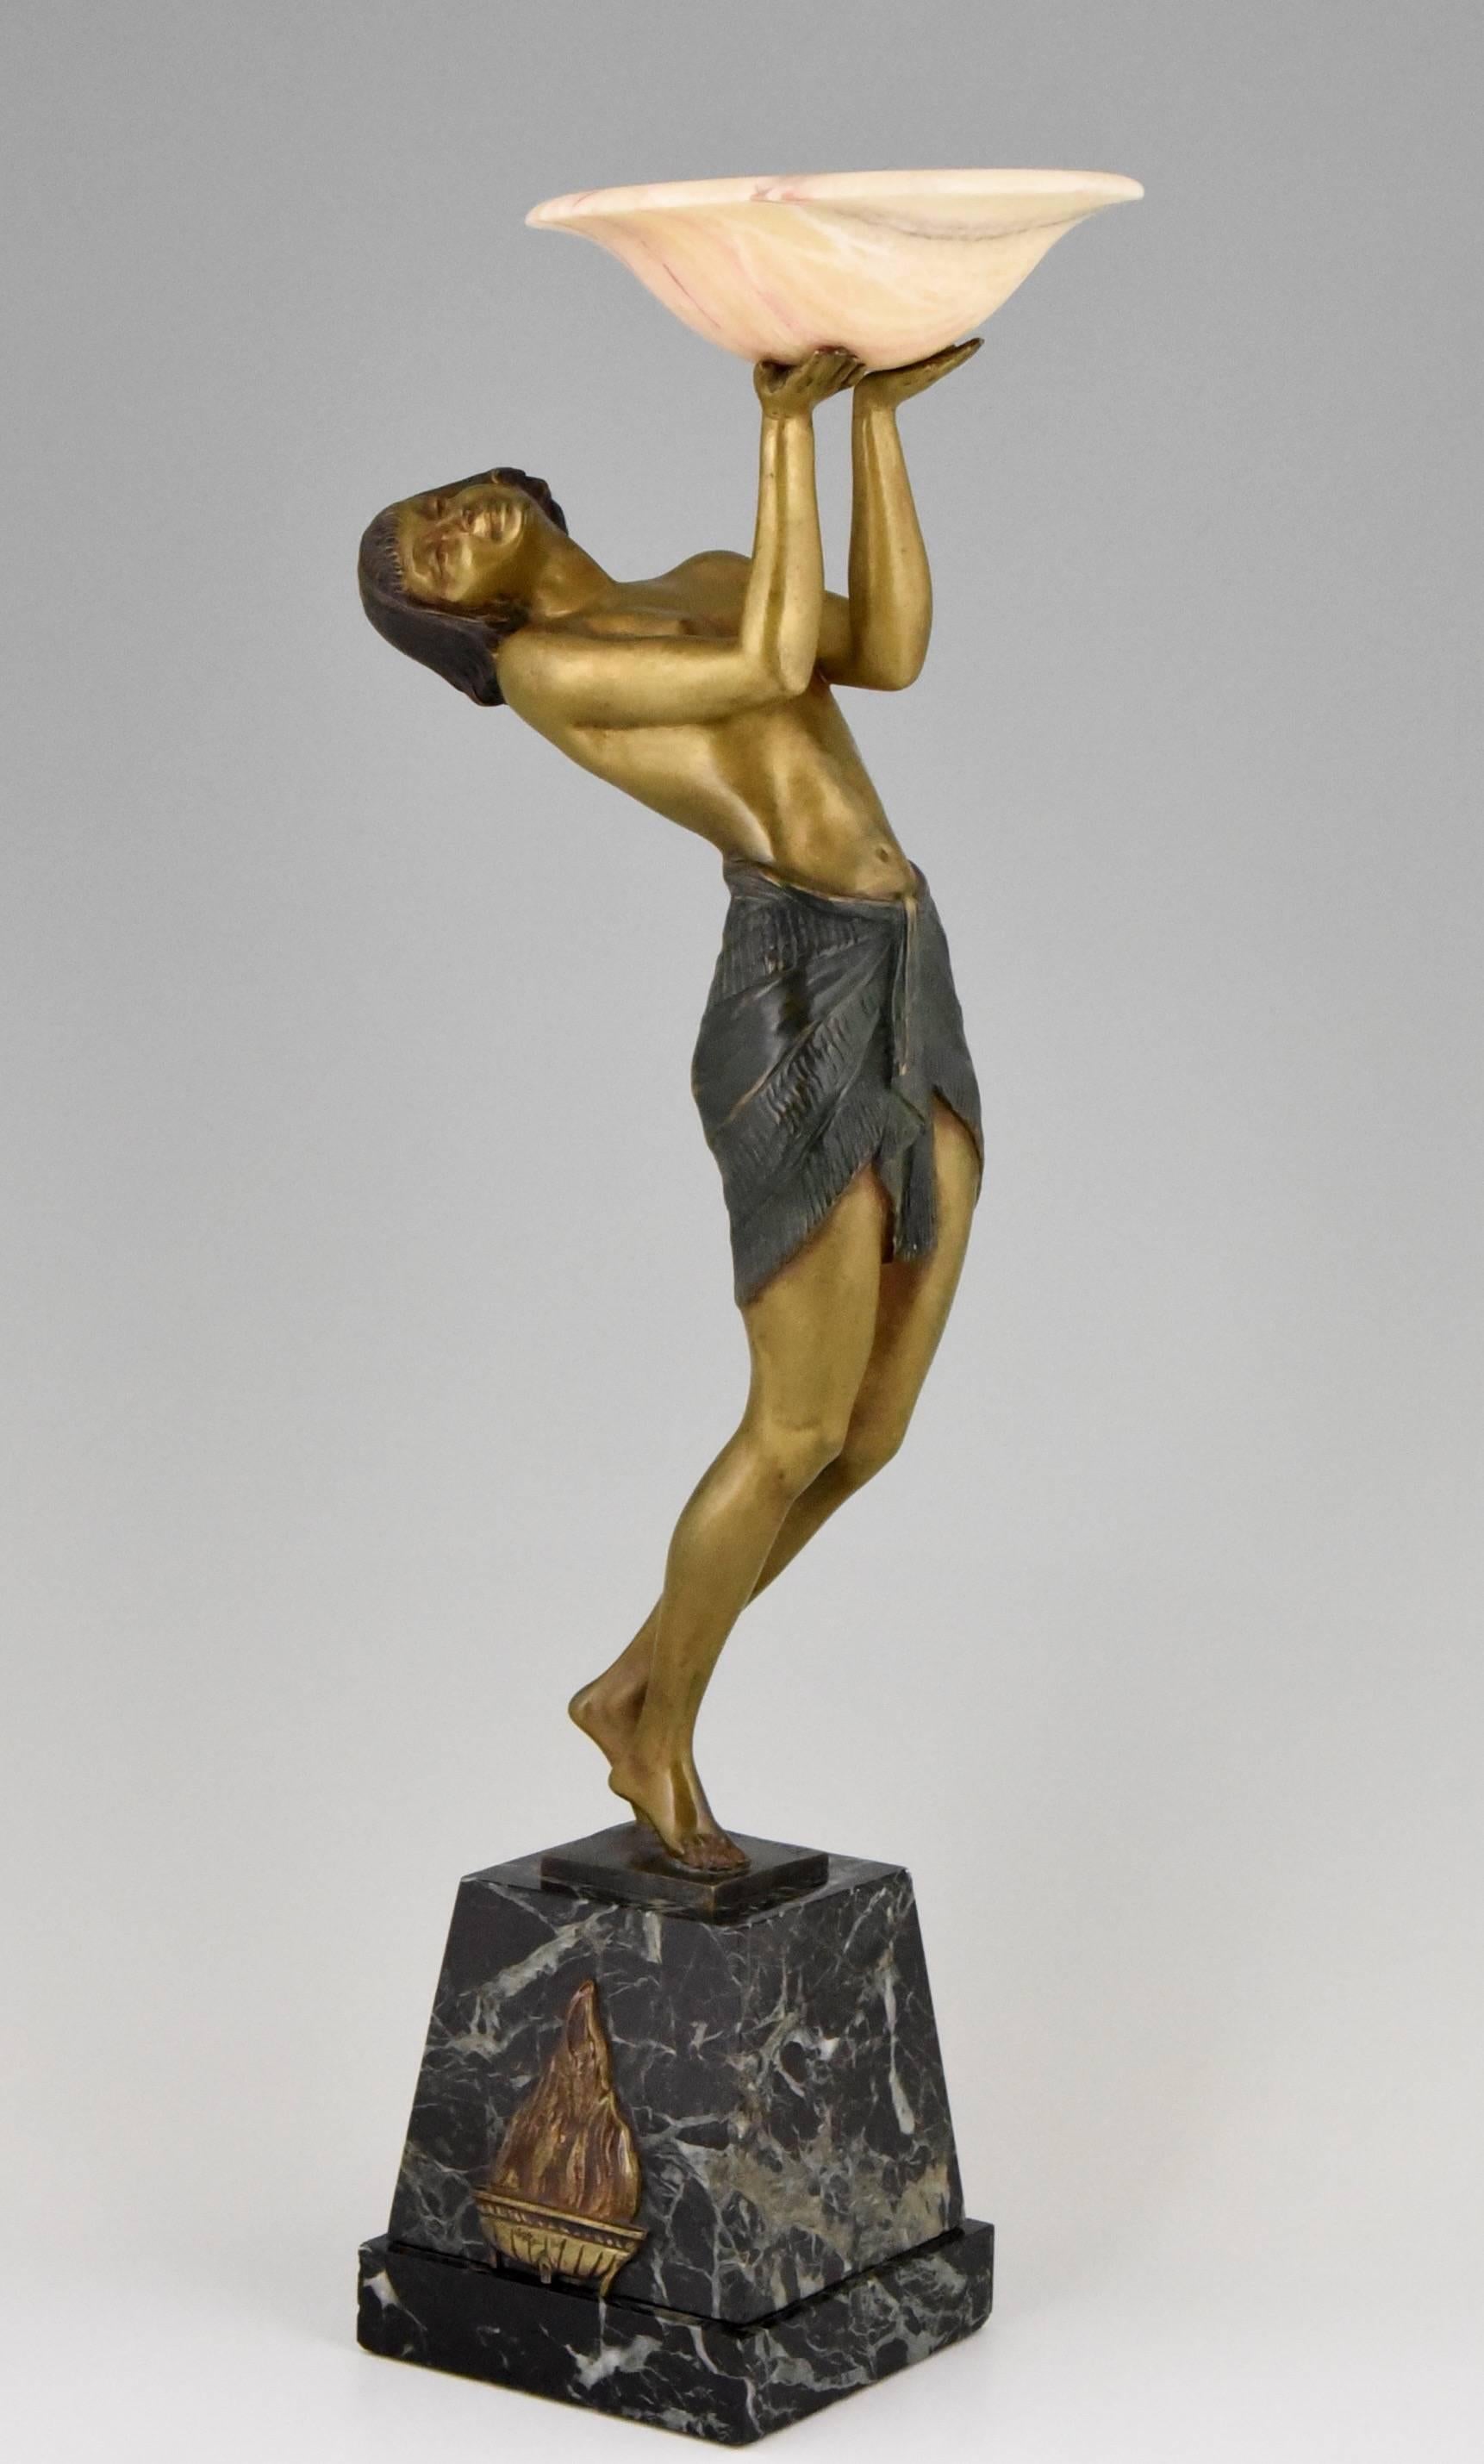 Patinated Art Deco Bronze sculpture of a nude Holding a Tray by Pierre Laurel 1930 France